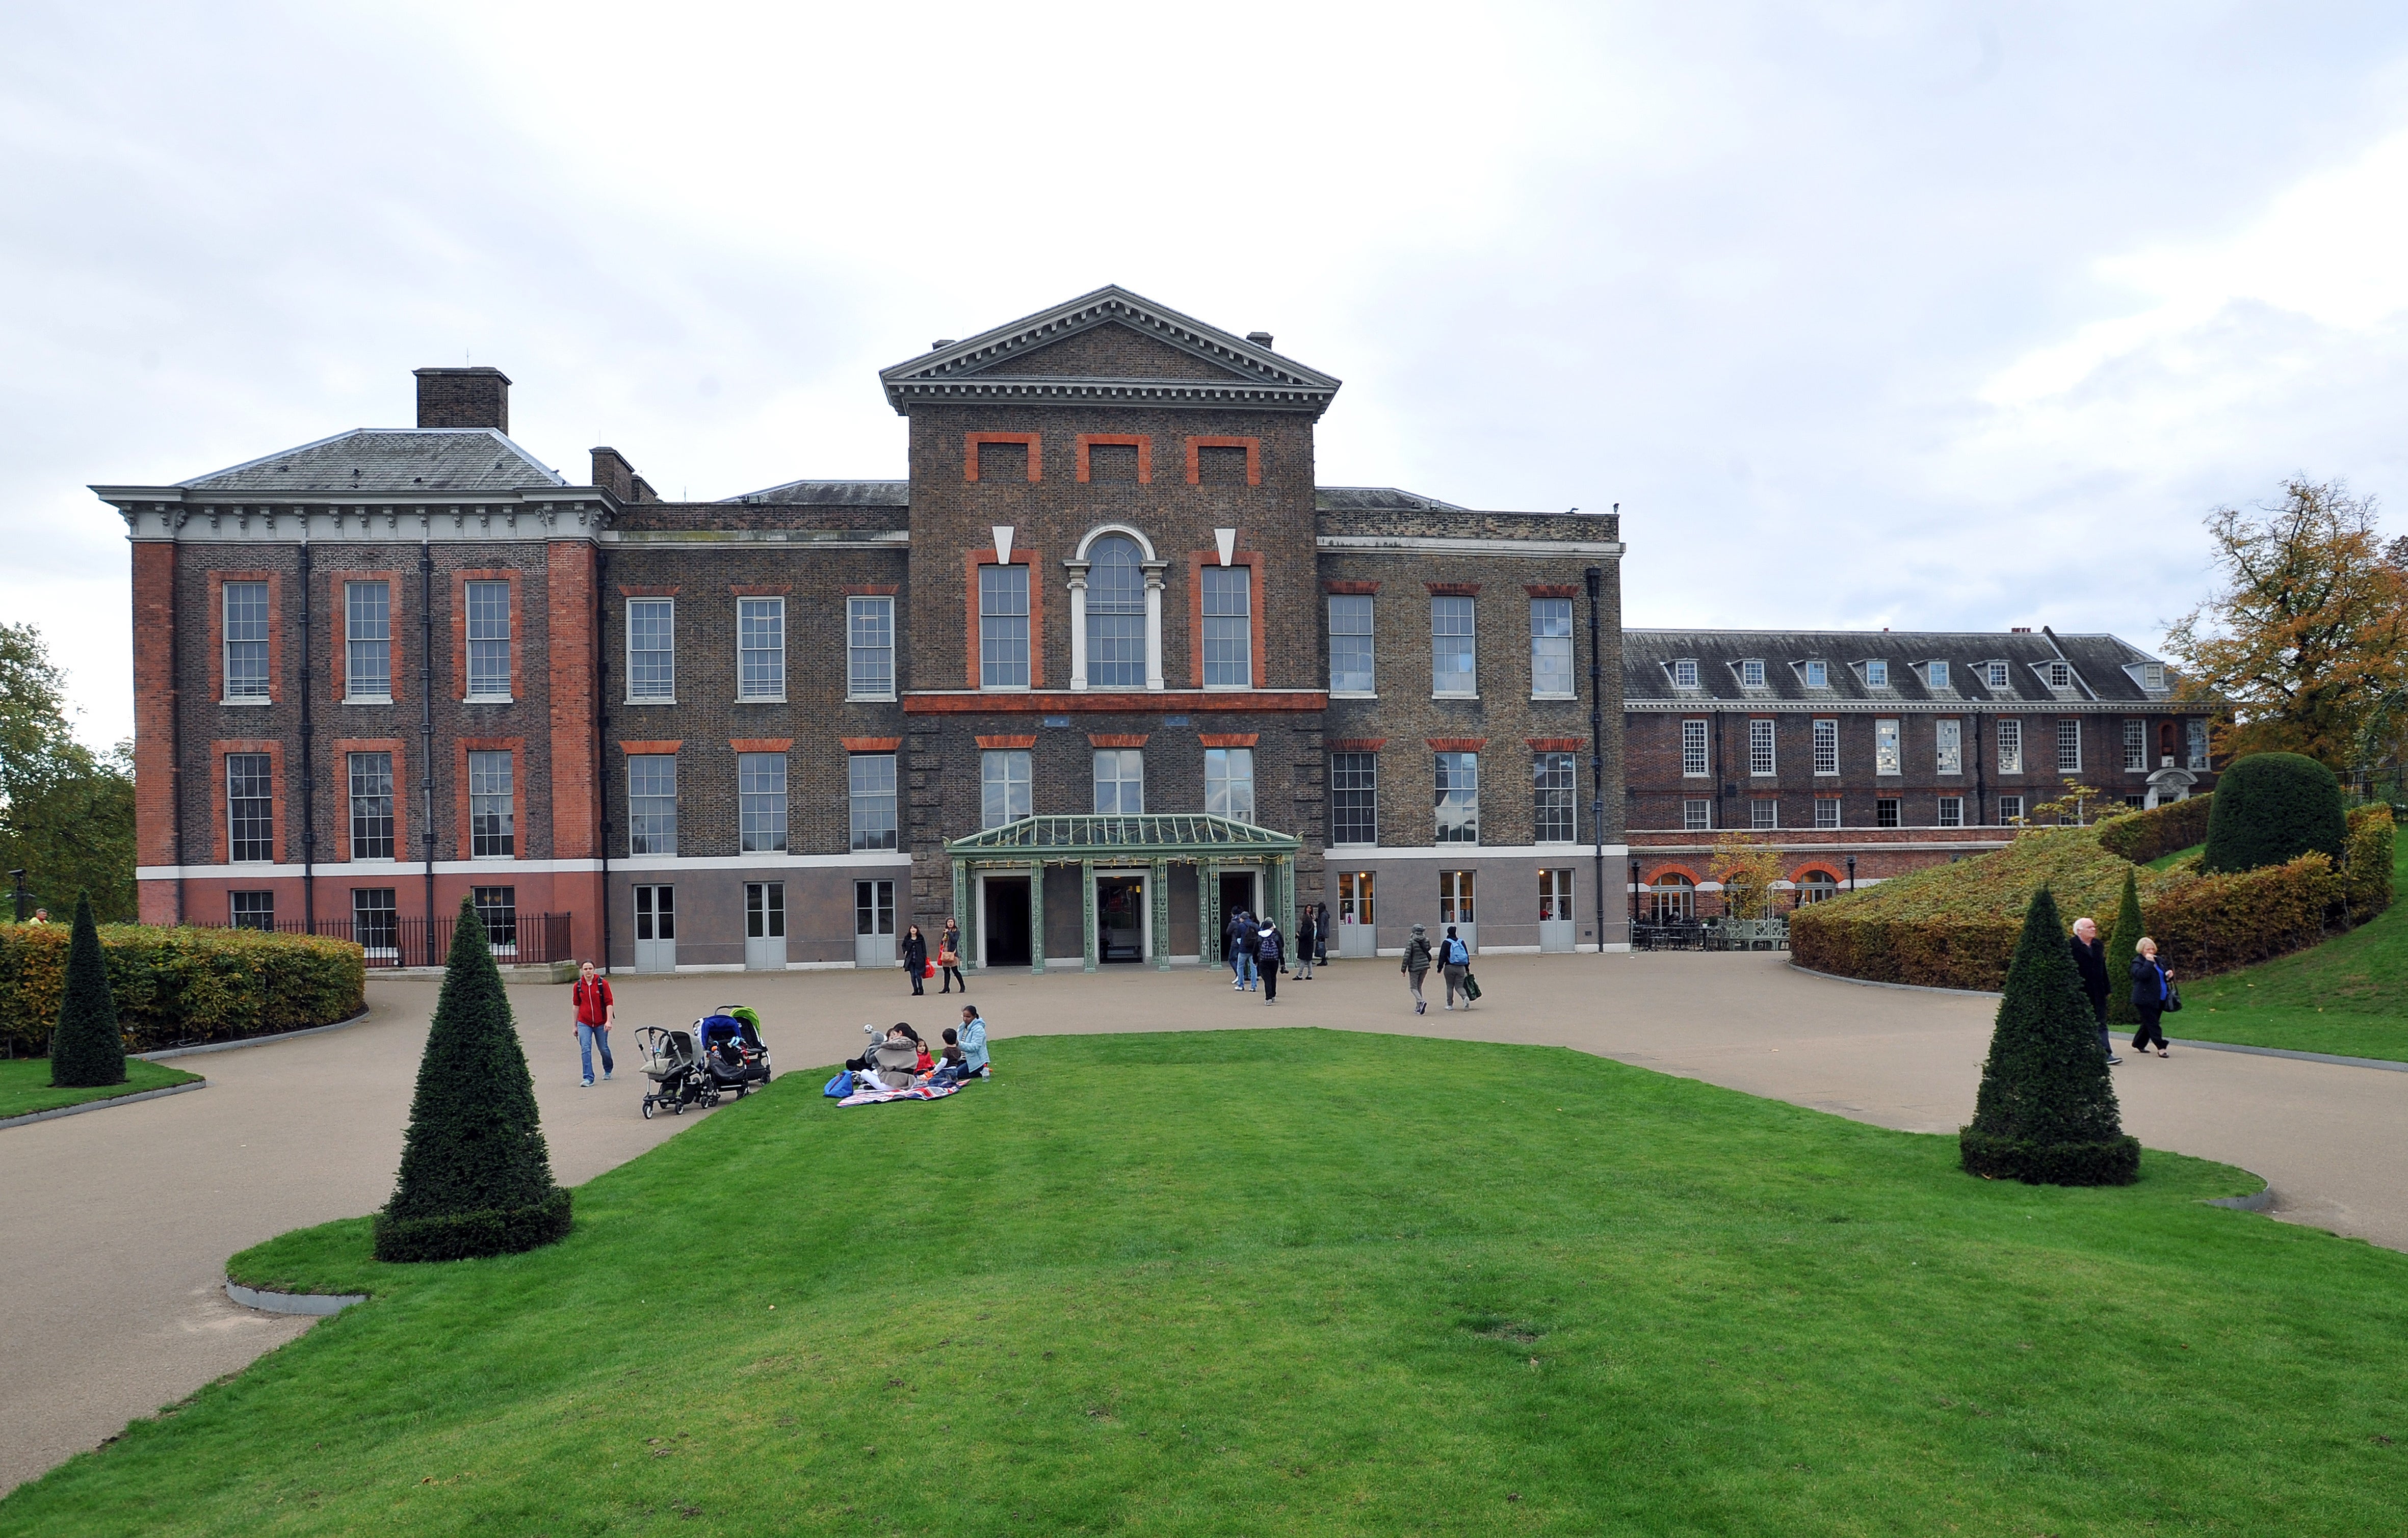 The royal couple’s central London home, Apartment 1A at Kensington Palace, used to belong to Princess Margaret, and remains their official working residence